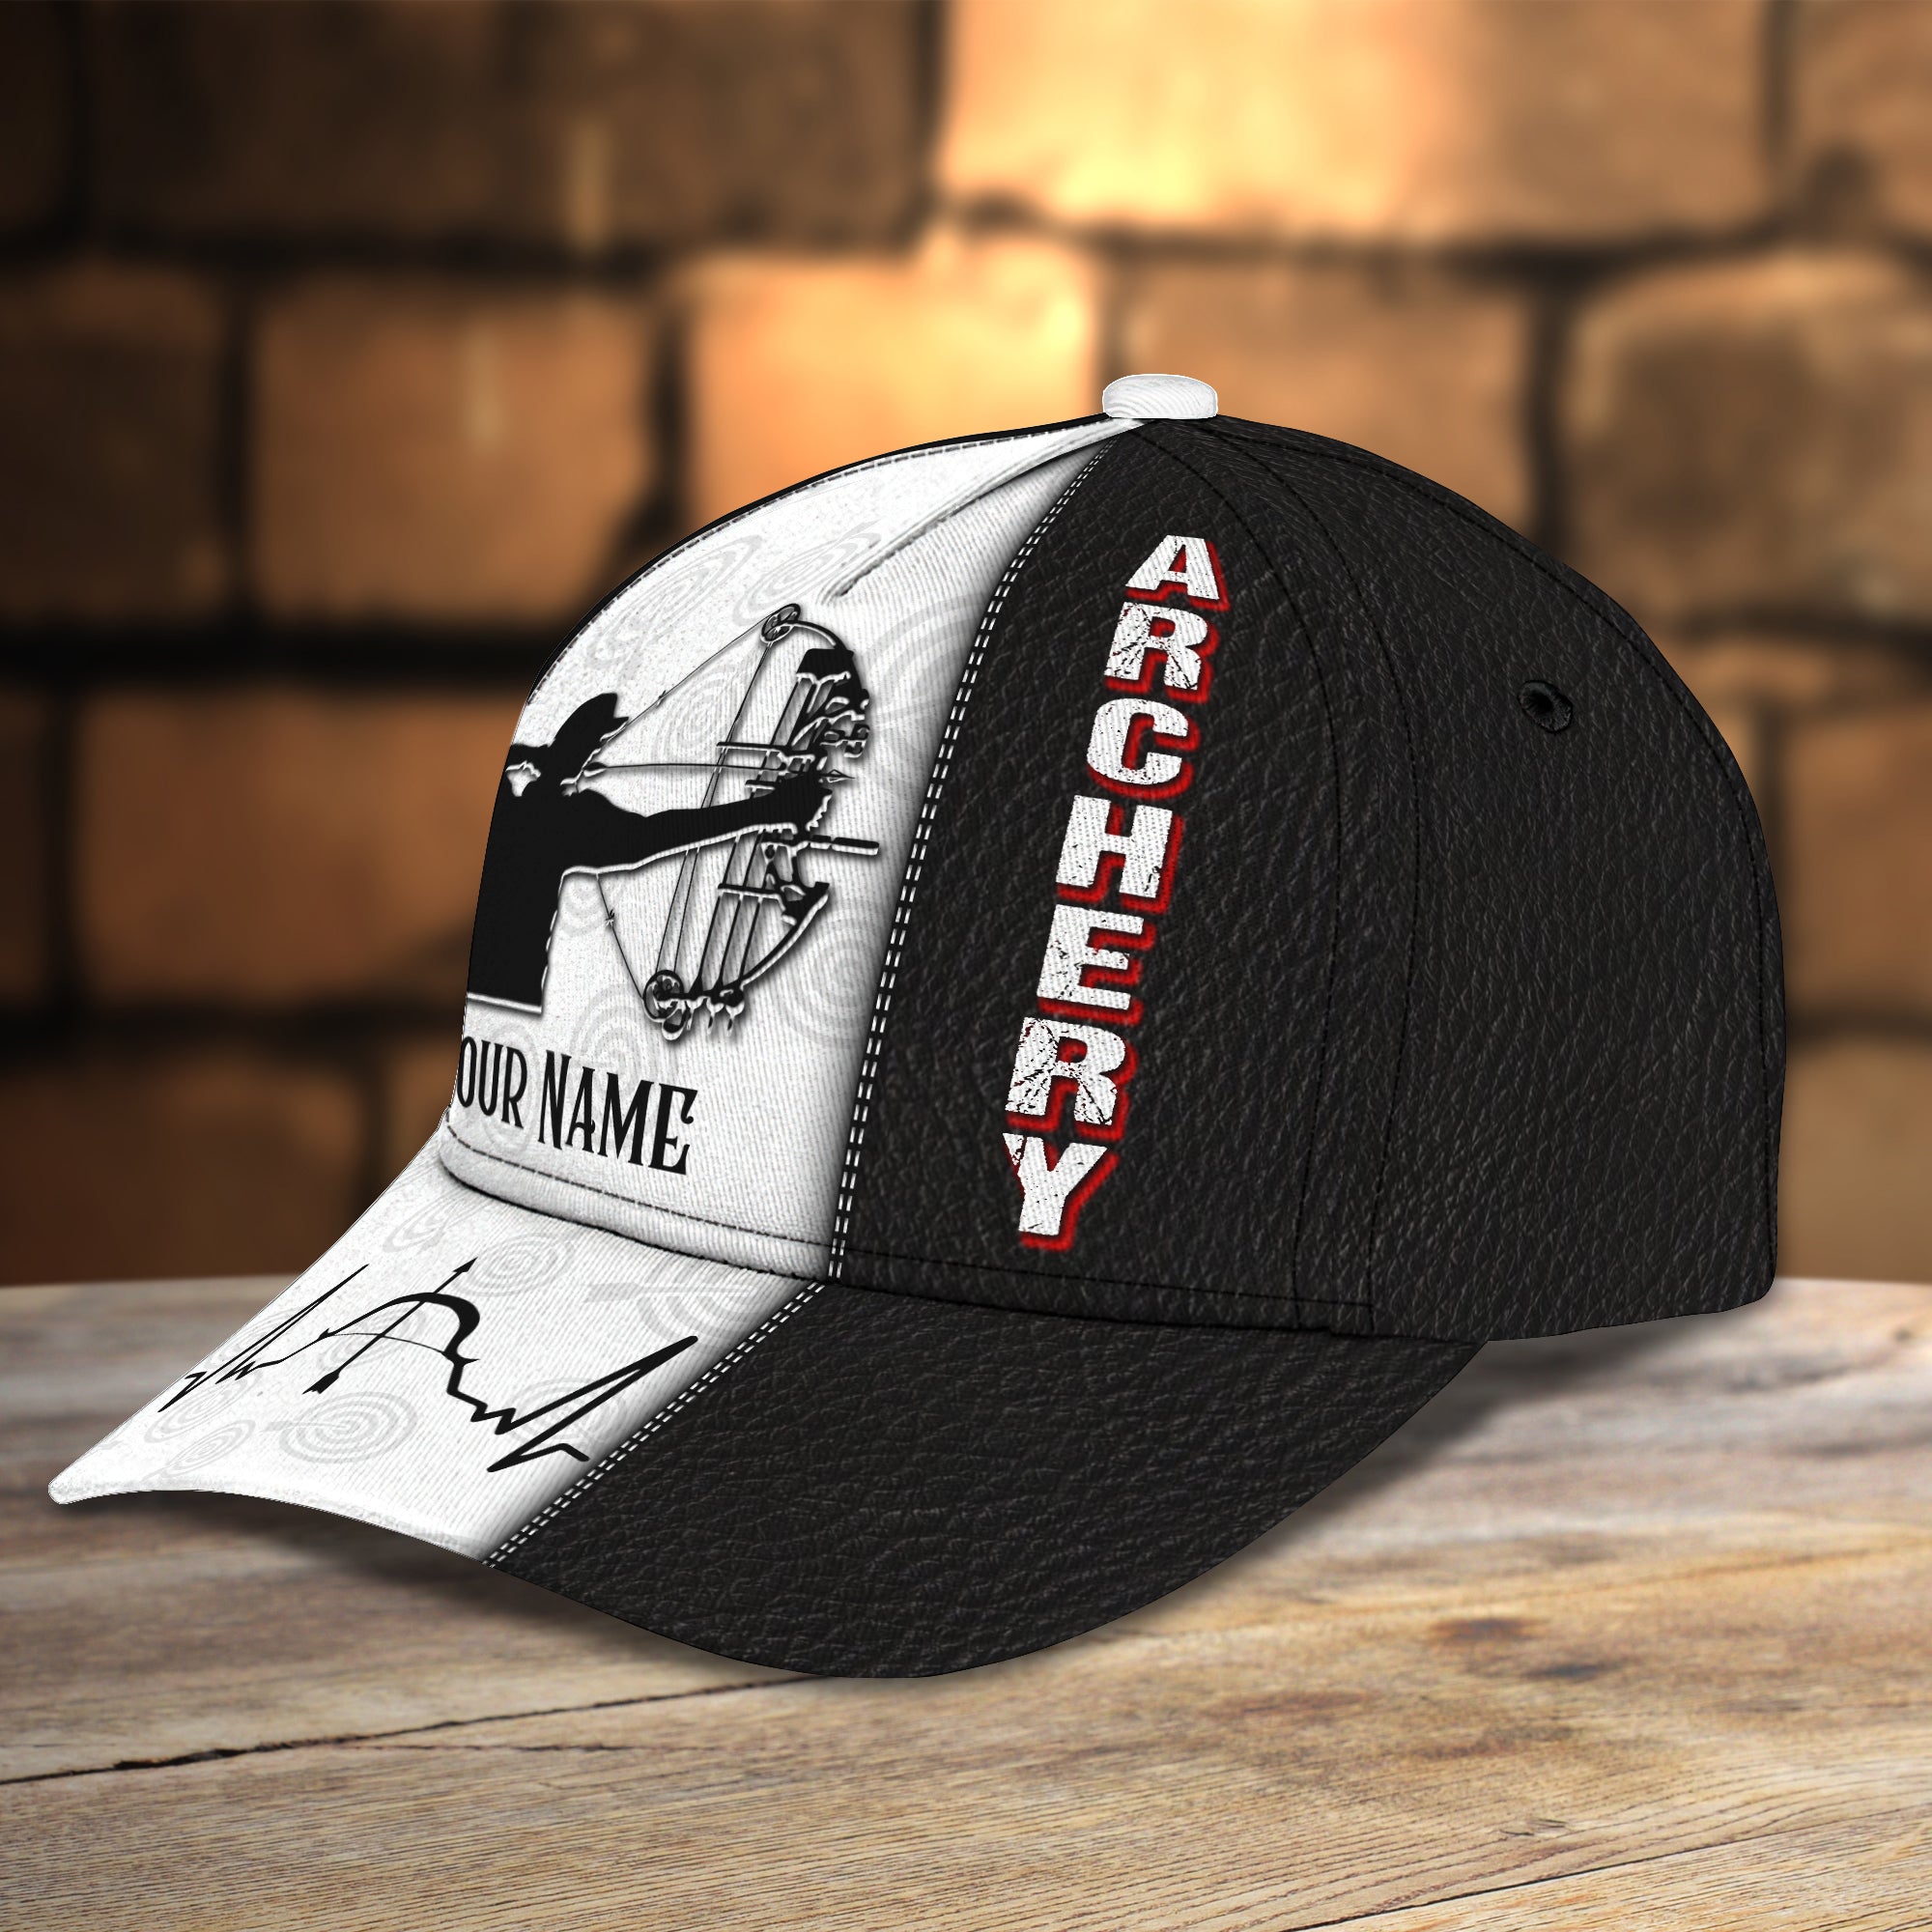 Archery Personalized Name Cap 77 - Nvc97